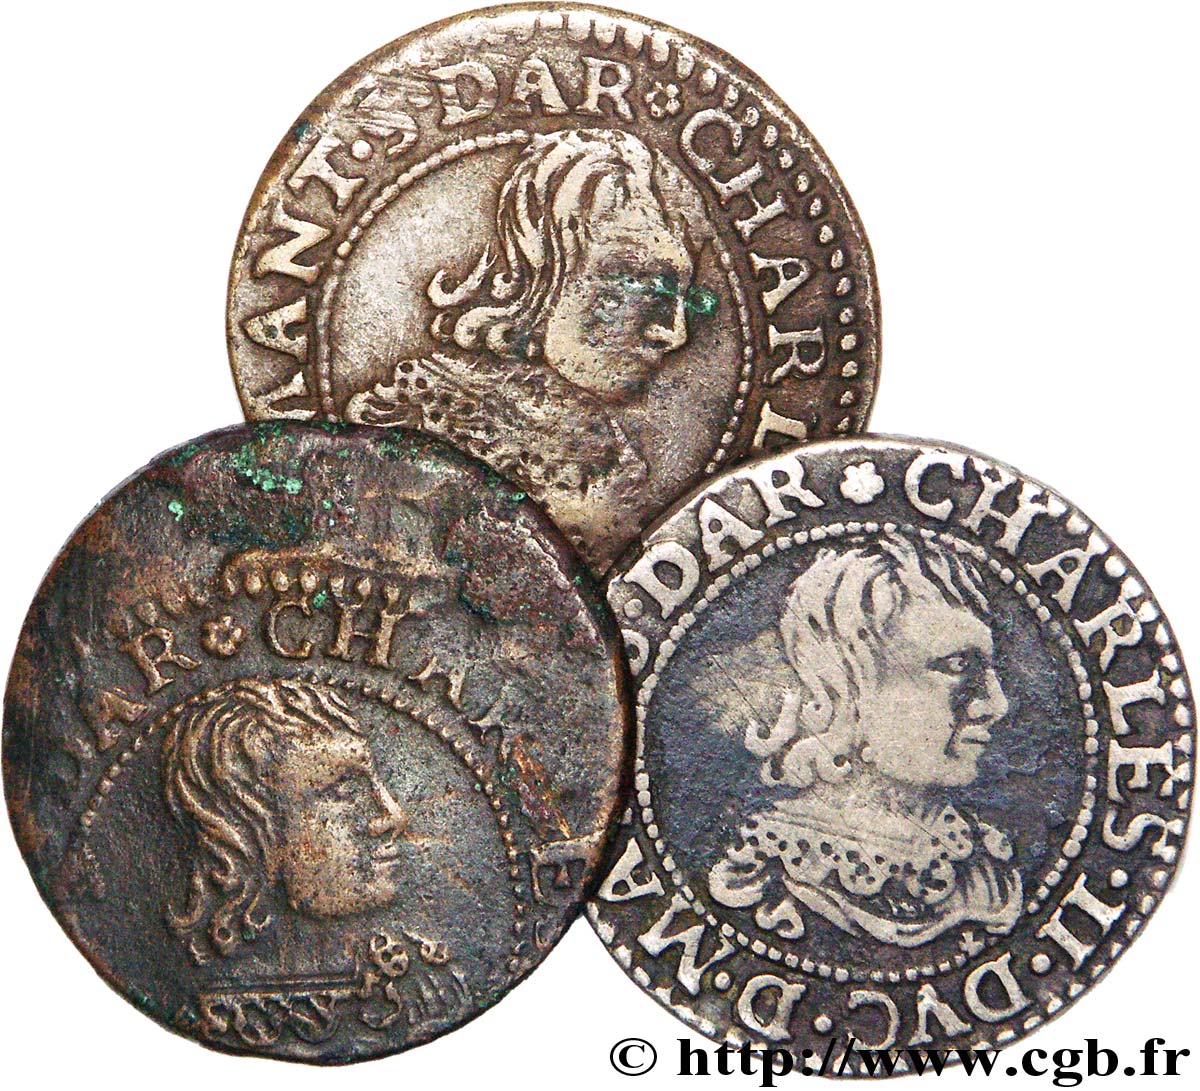 ARDENNES - PRINCIPALITY OF ARCHES-CHARLEVILLE - CHARLES II GONZAGA Lot de 3 double tournois, type 22 VF